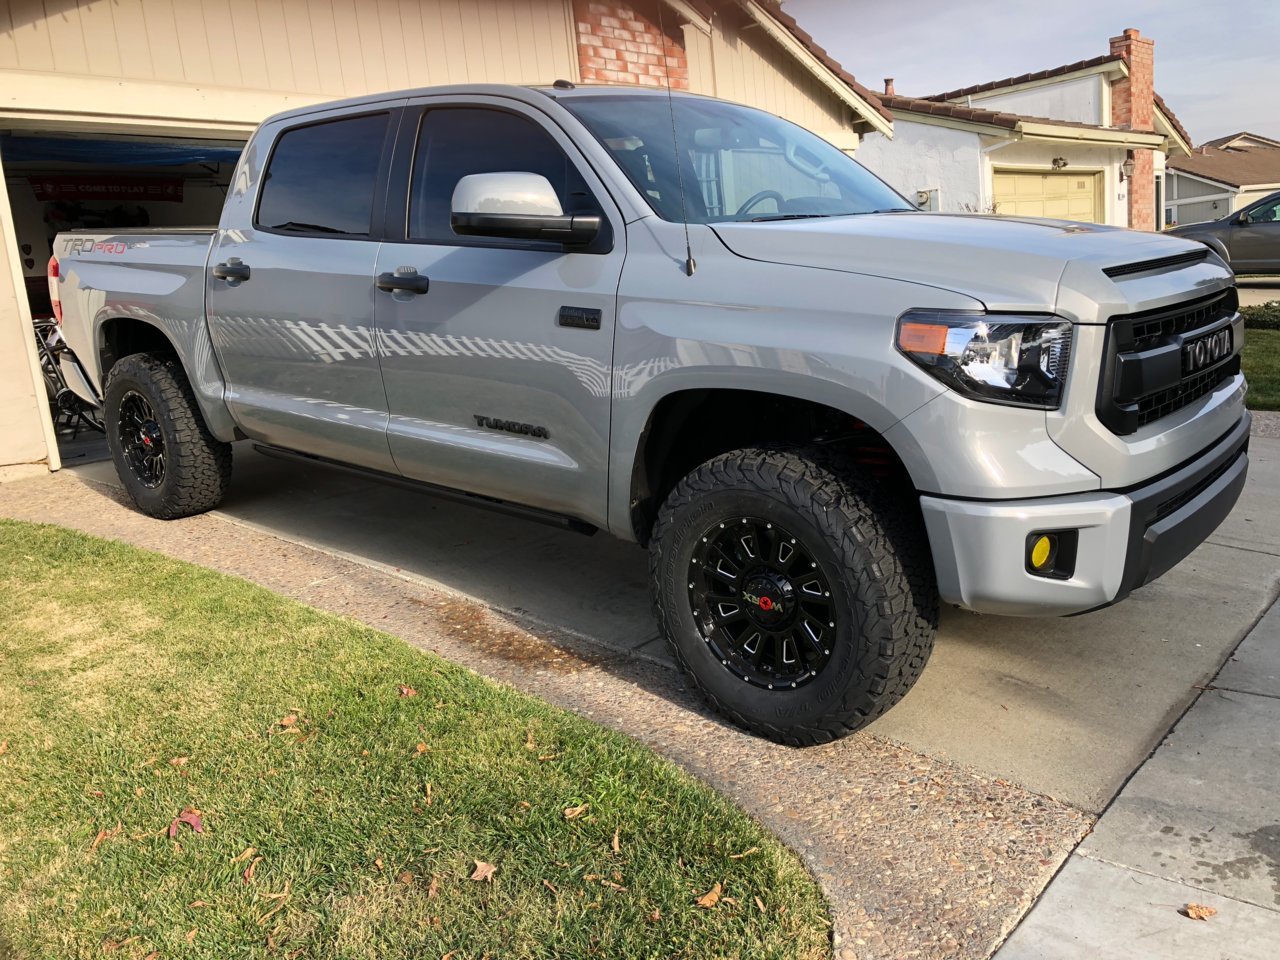 Norcal craigslist finds | Page 20 | Toyota Tundra Forum